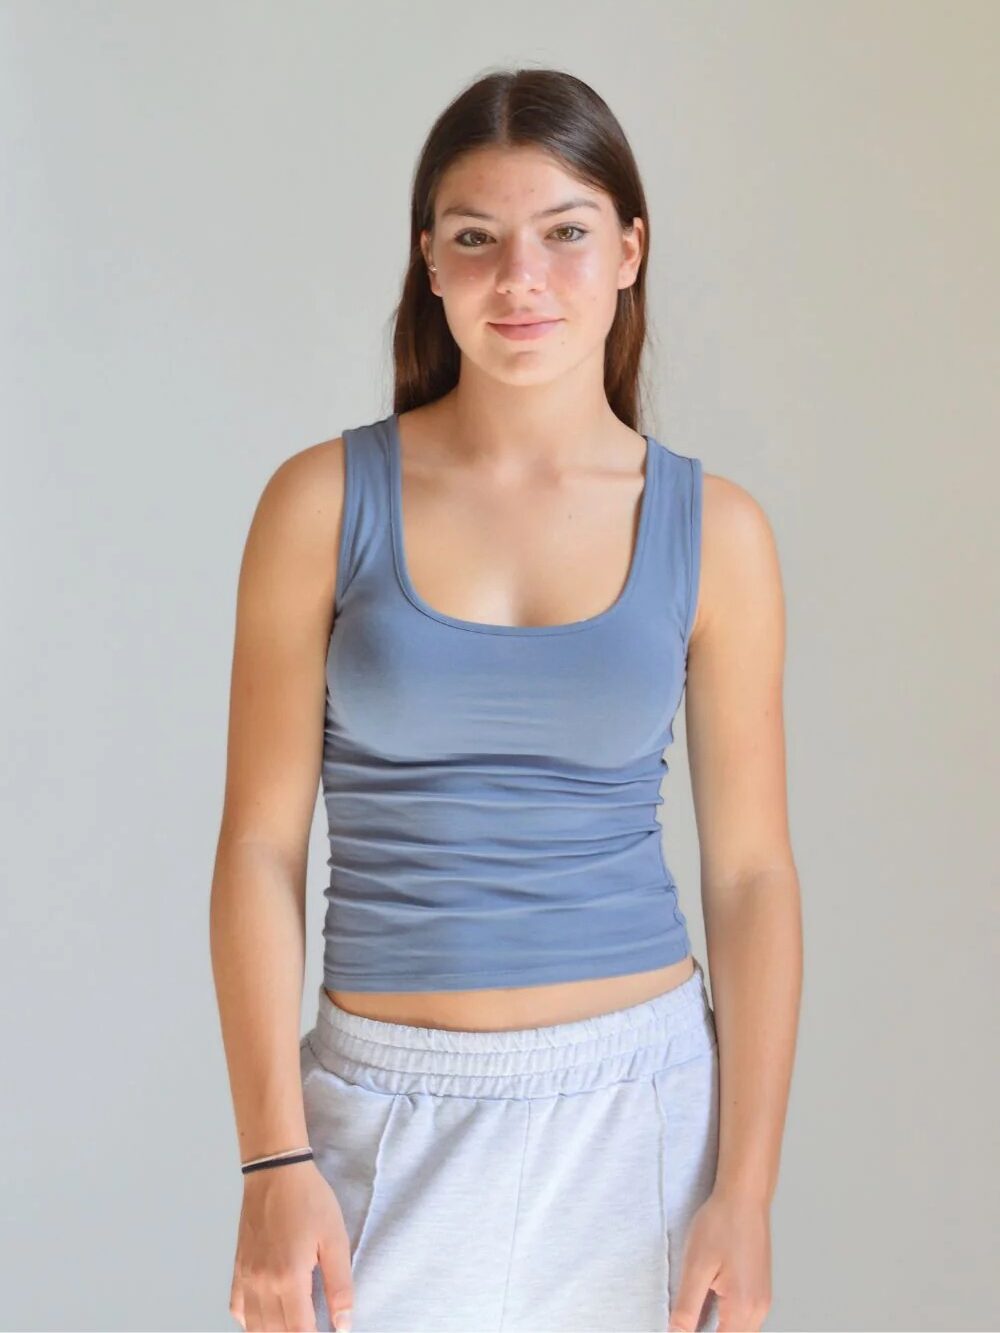 Young woman in a blue tank top and grey sweatpants standing against a light grey background.